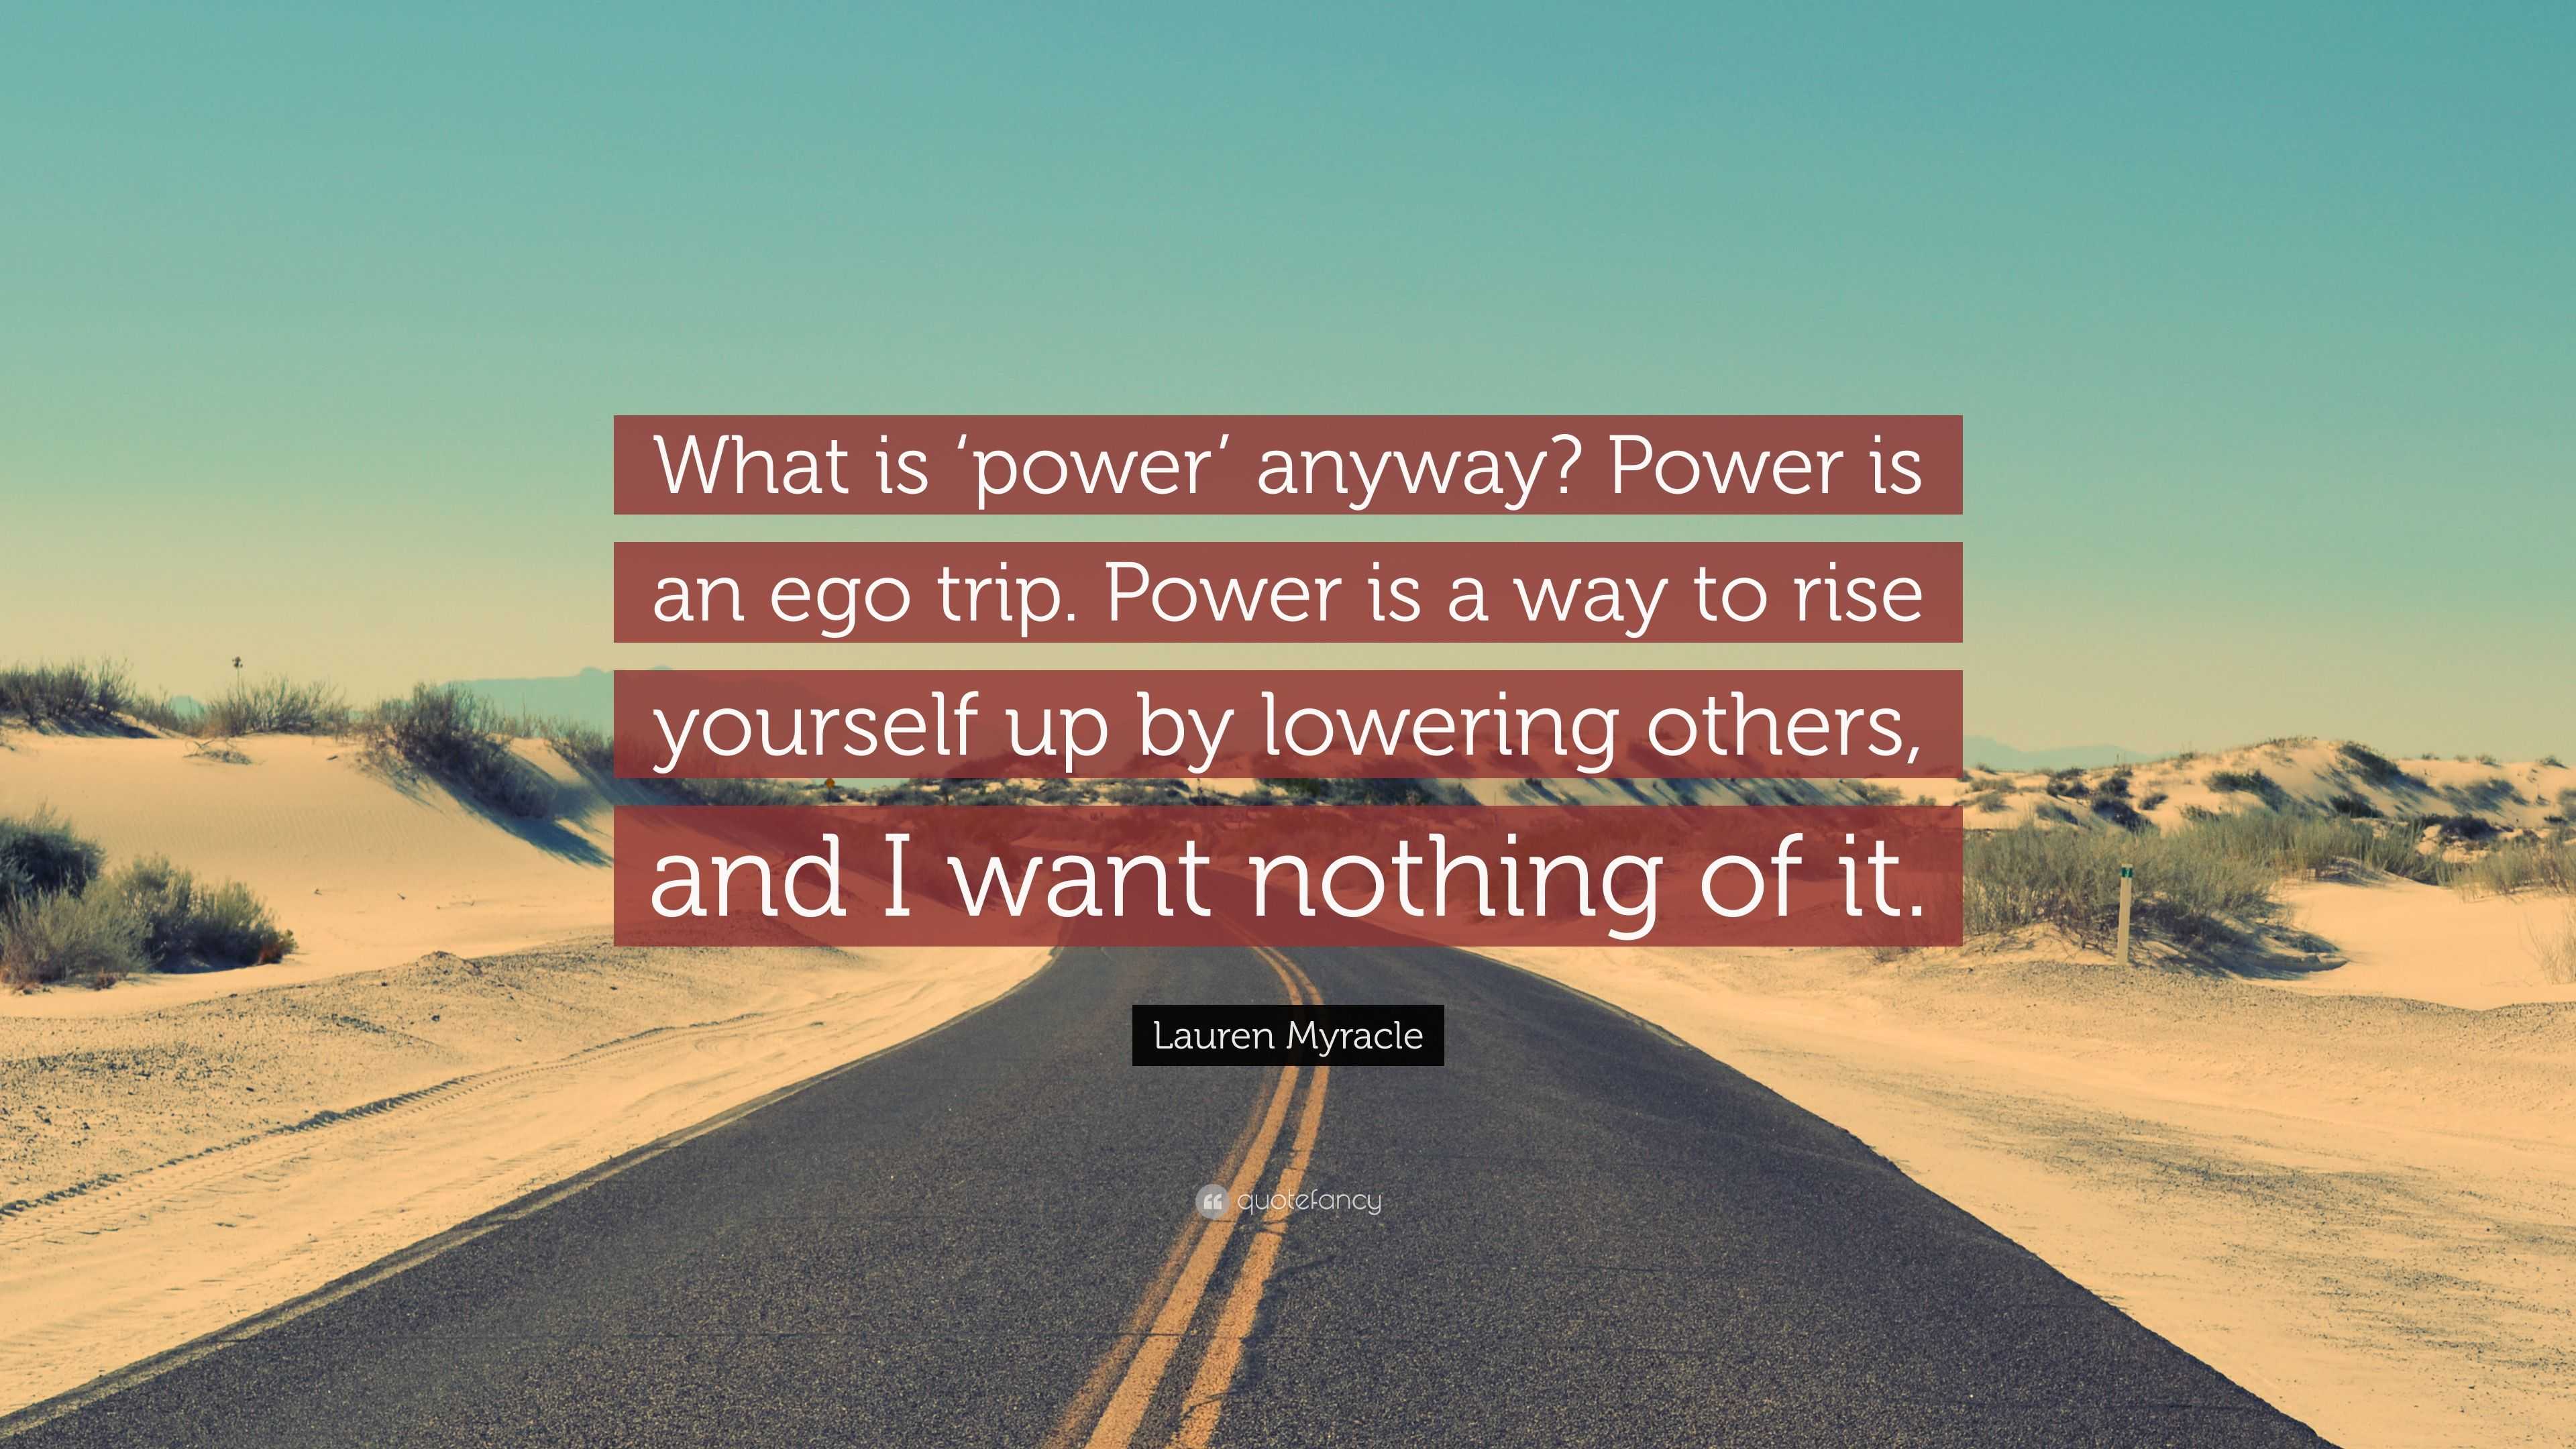 Power Trip Quotes, Power Trip Sayings